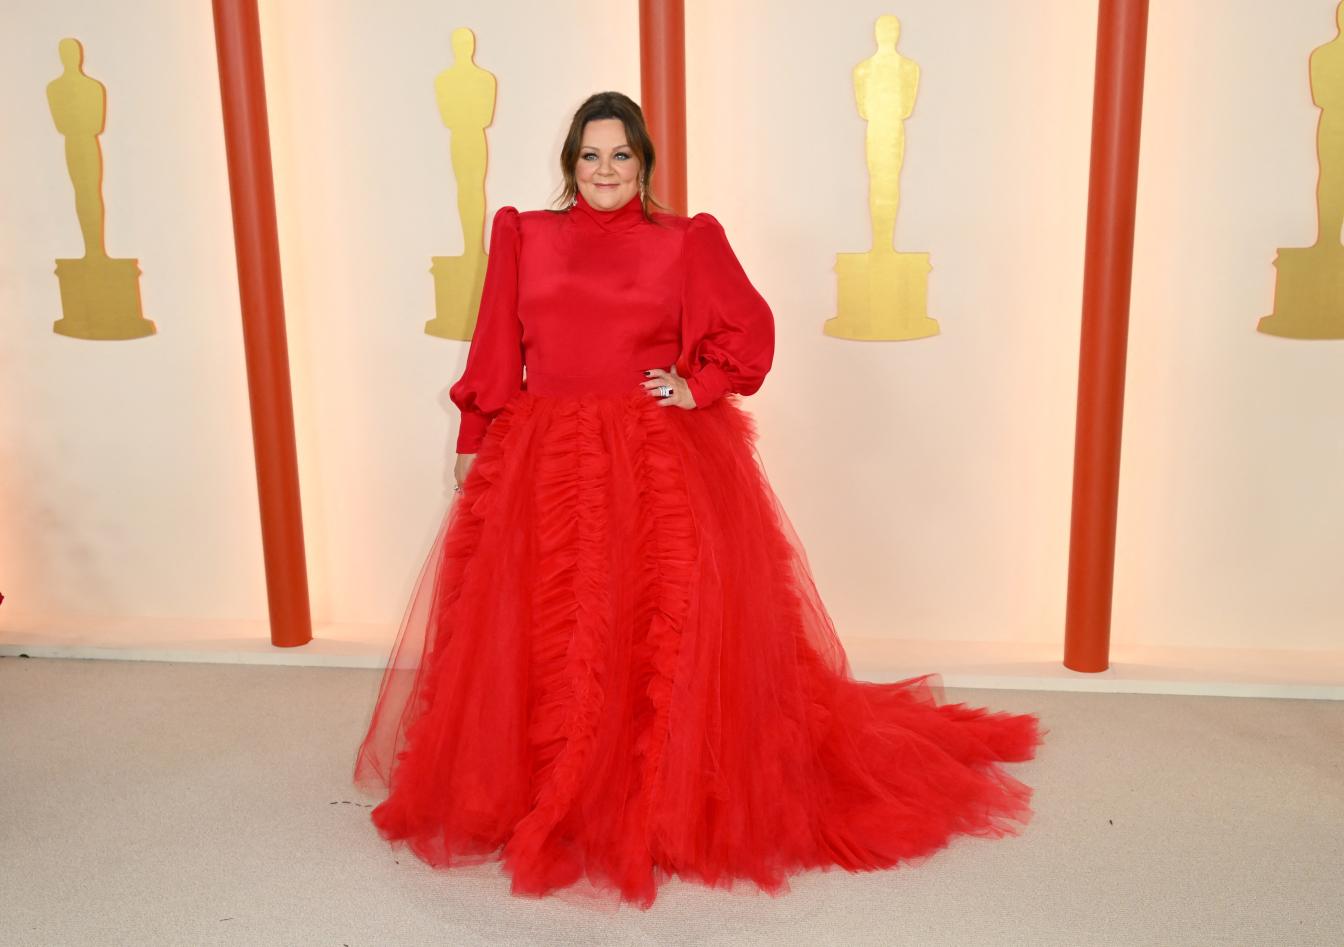 US actress Melissa McCarthy attends the 95th Annual Academy Awards at the Dolby Theatre in Hollywood